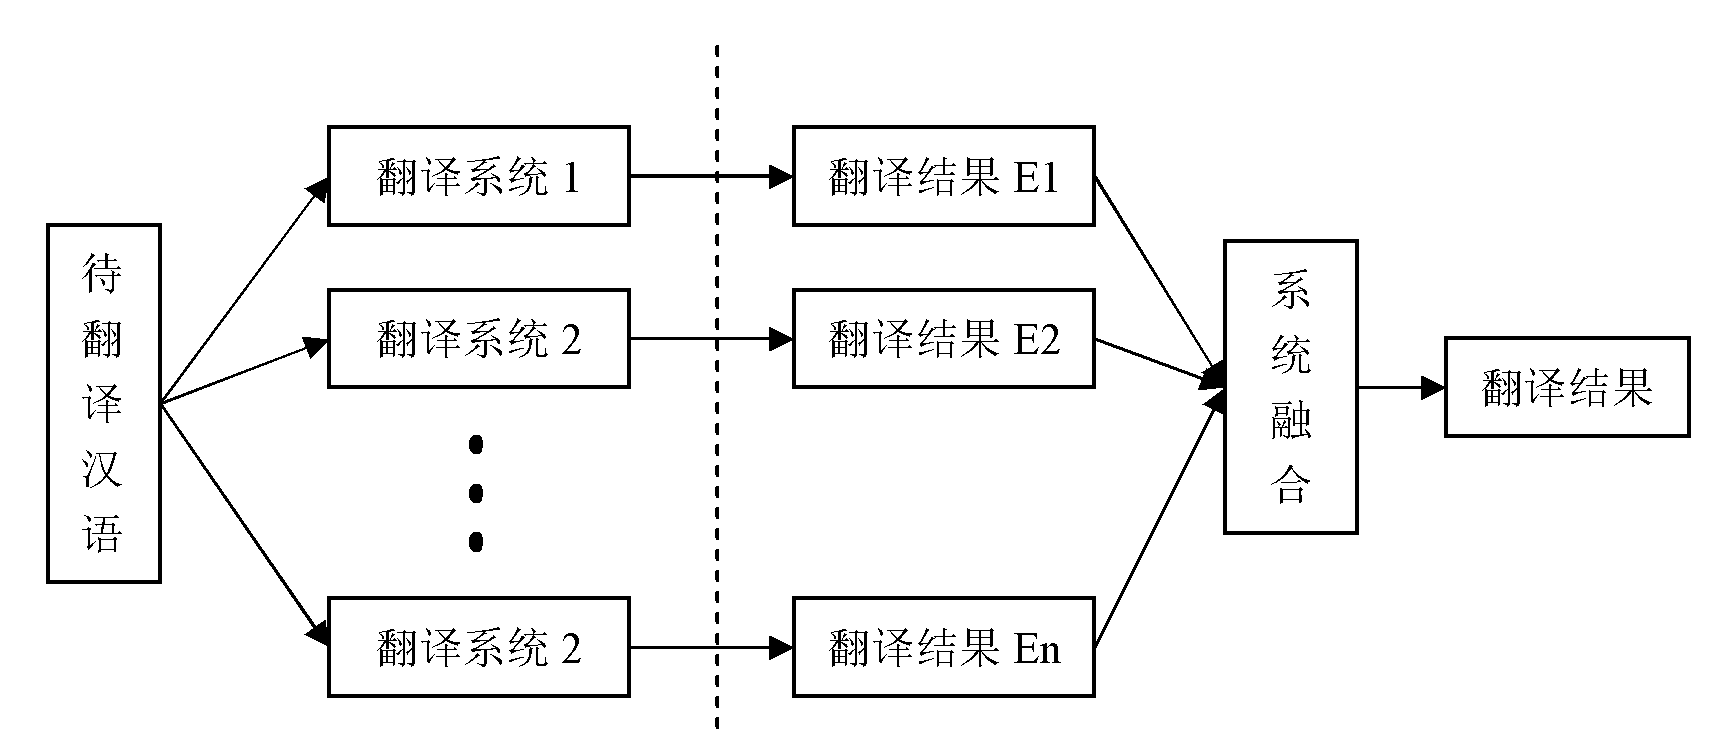 Forest-based system combination method for counting machine translation